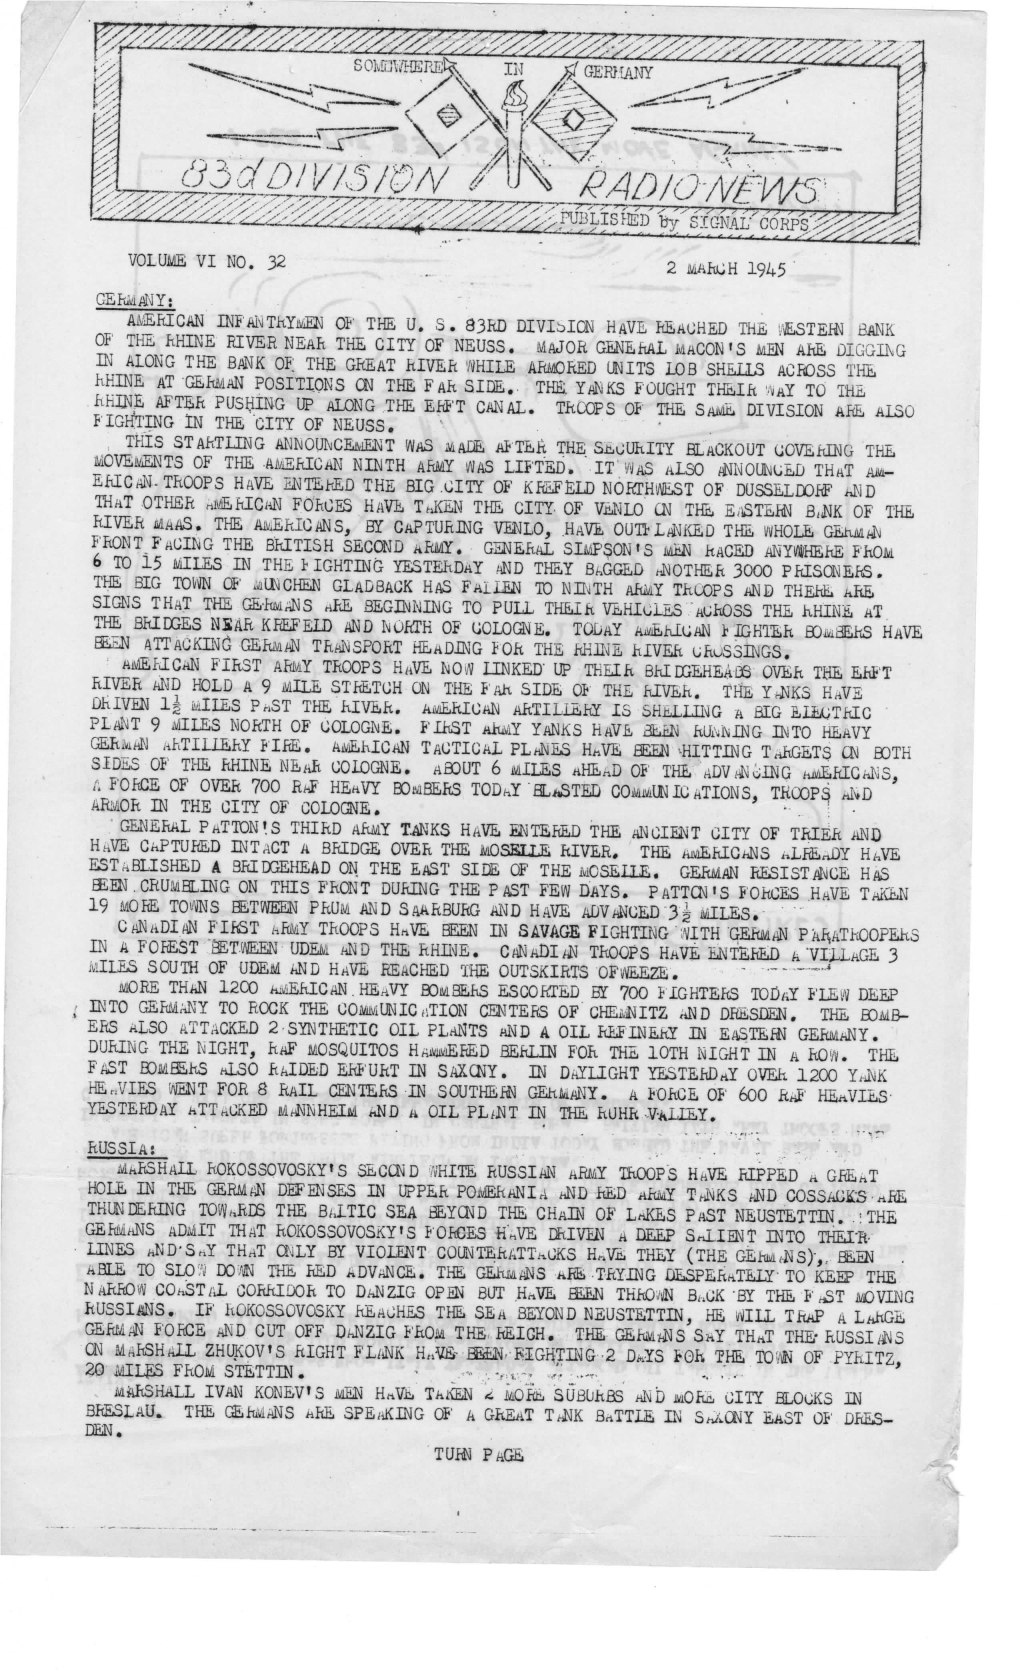 83Rd Division Radio News, Germany, Vol IV #32, March 2, 1945